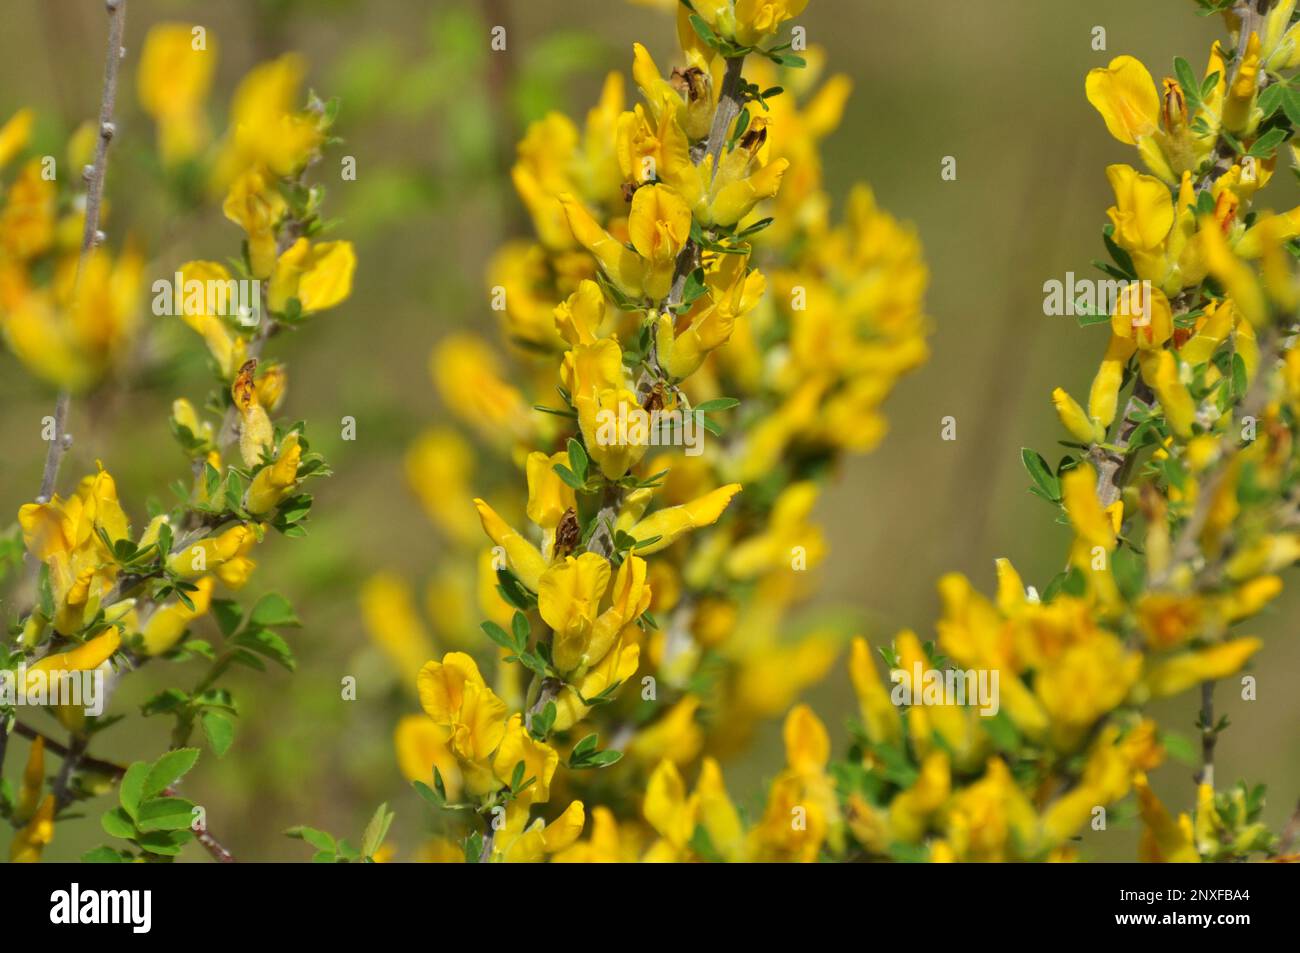 Chamaecytisus ruthenicus blooms in the wild in spring Stock Photo